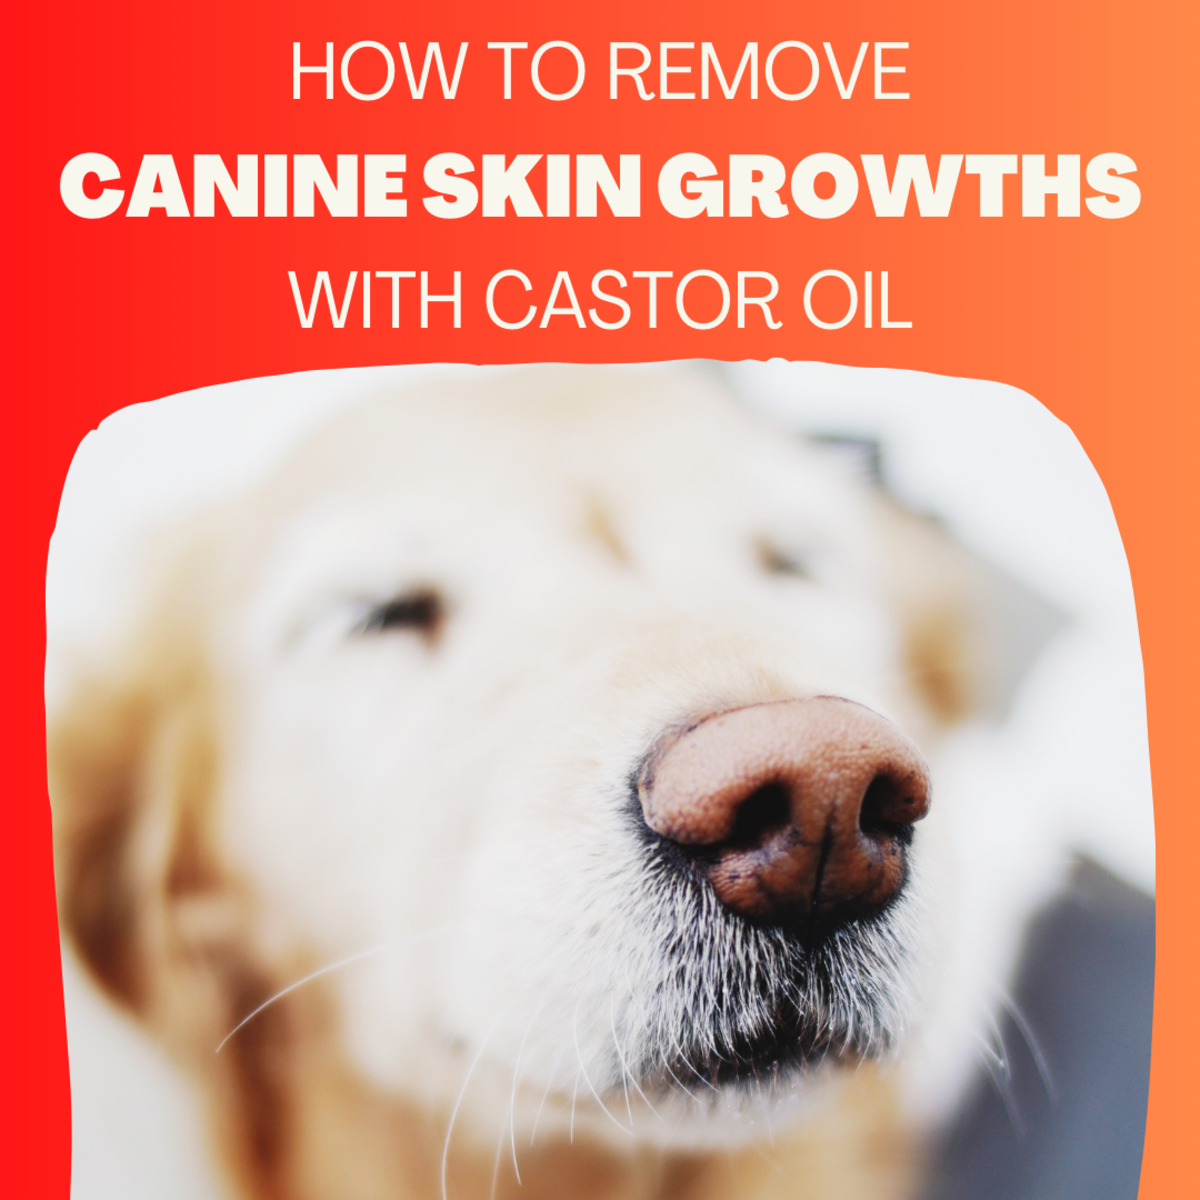 How to Get Rid of Growths on Dogs for Under Five Dollars